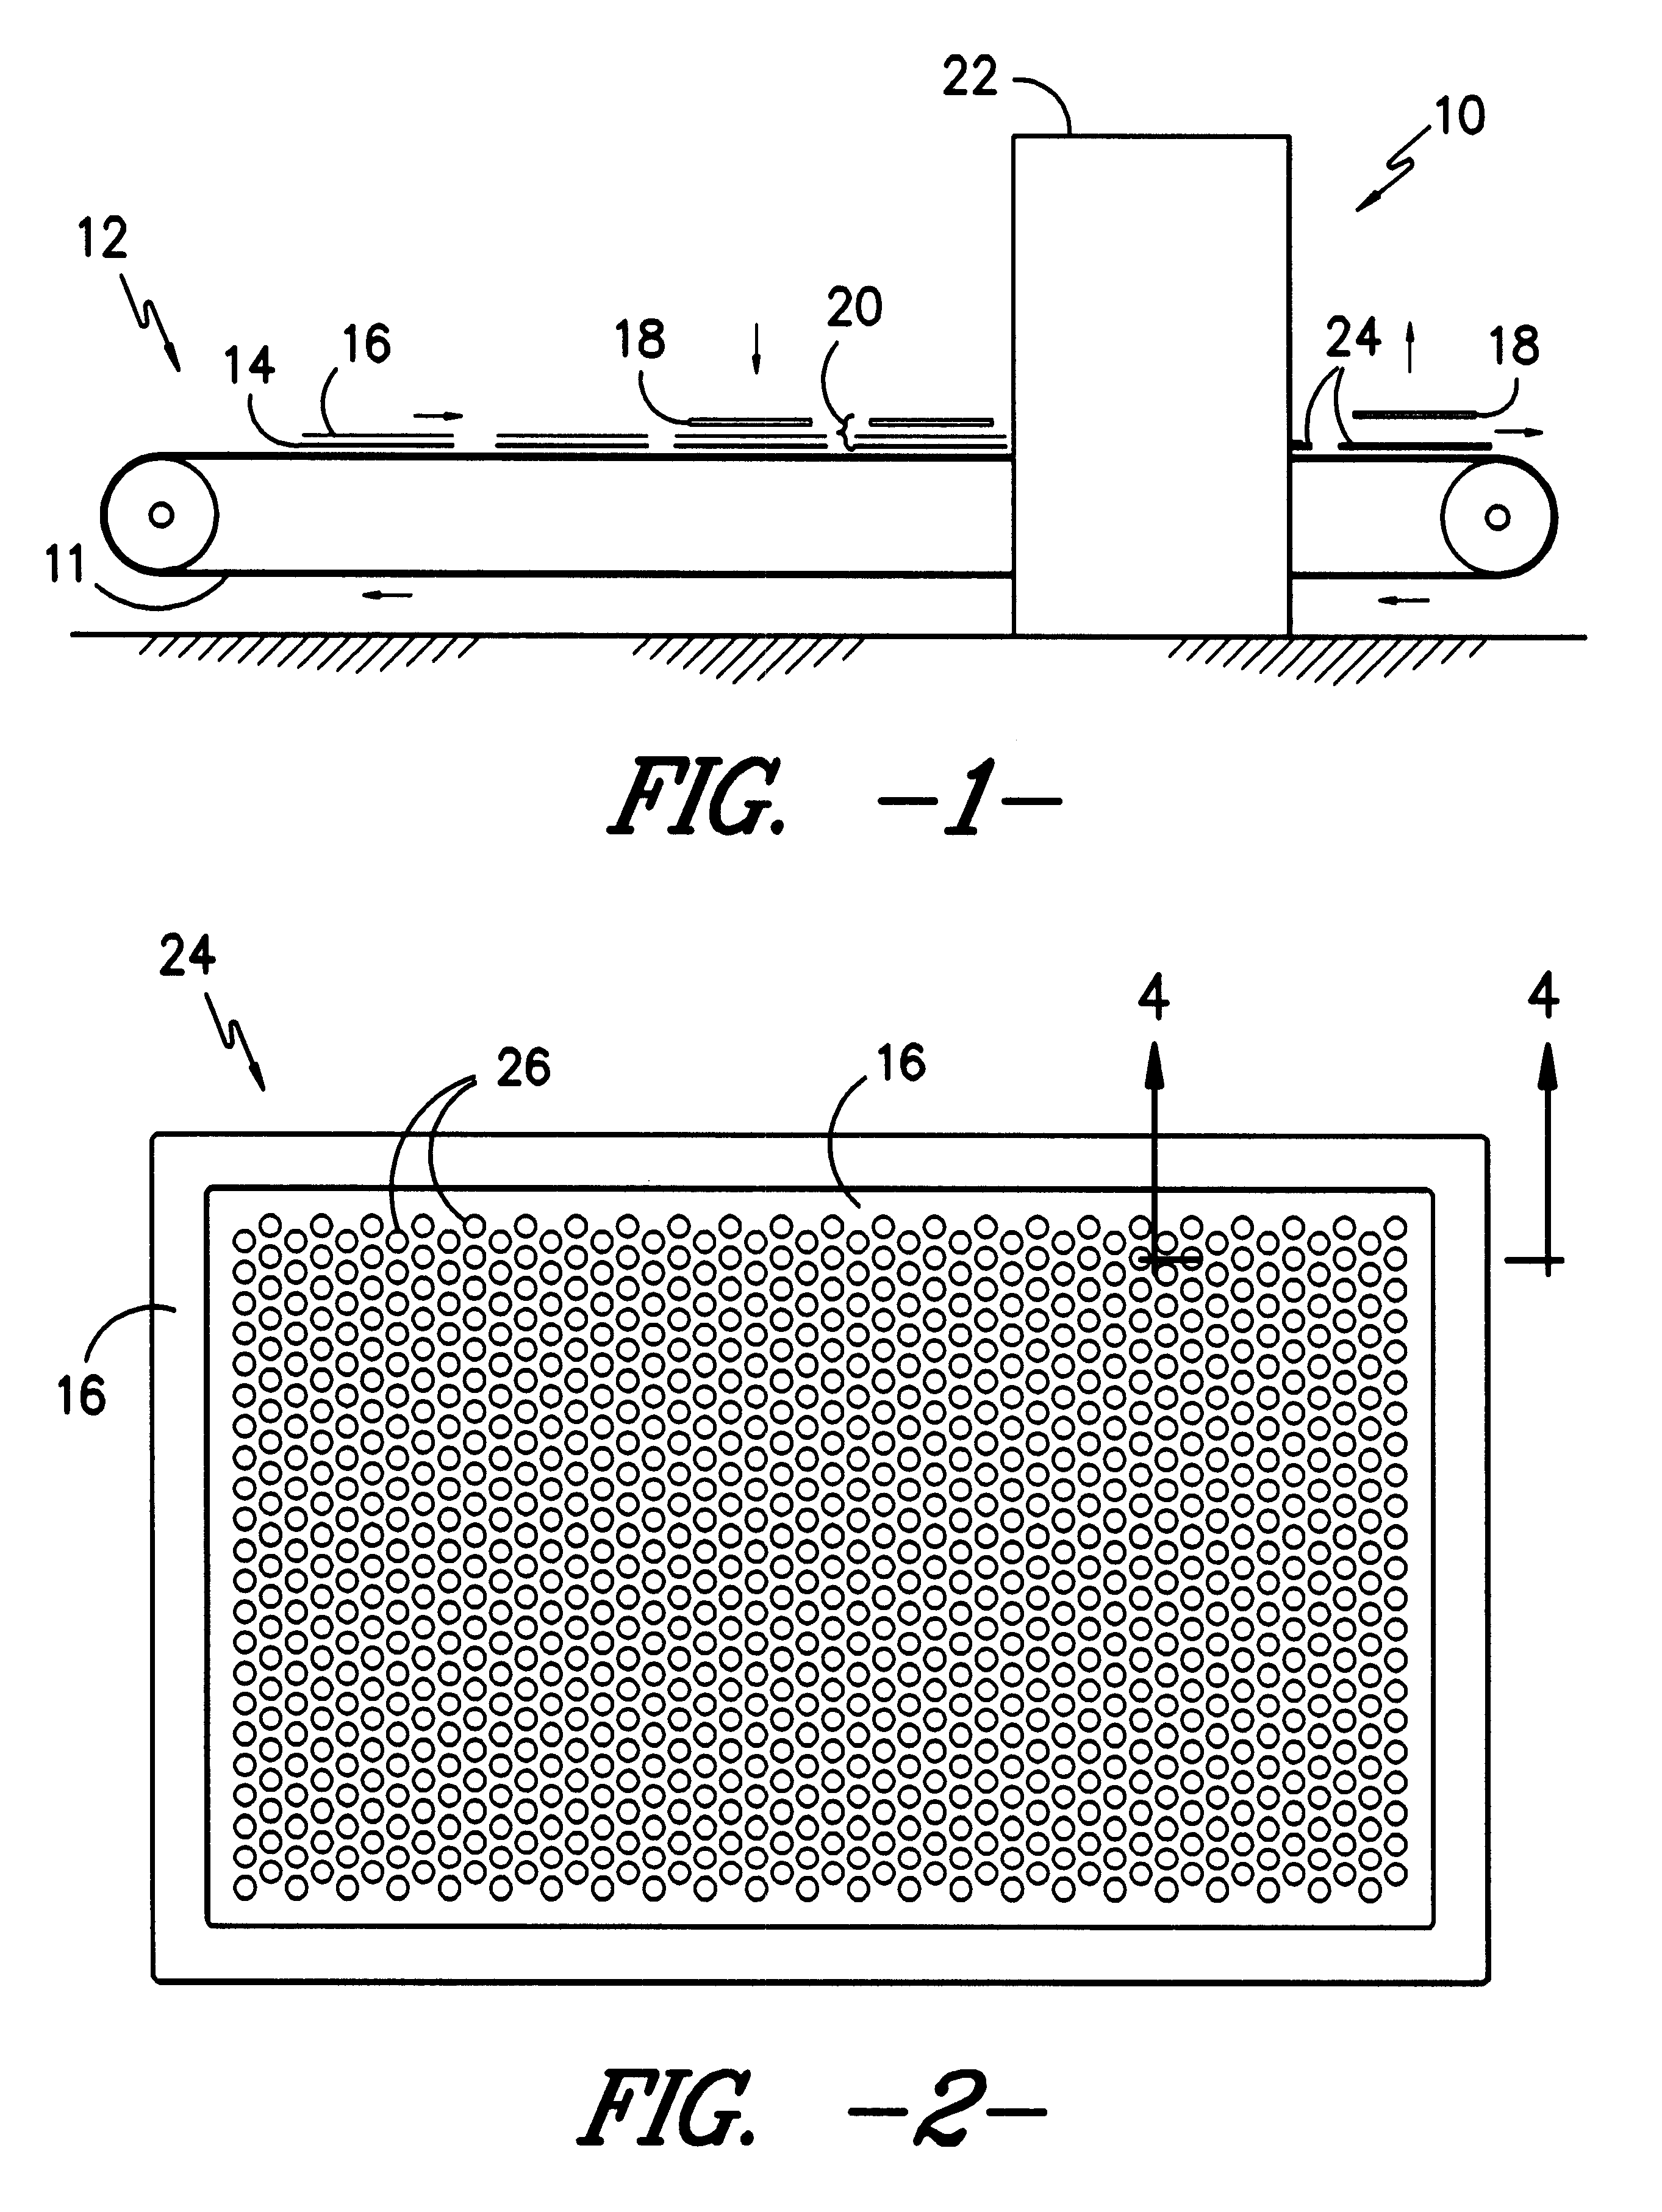 Cushioned rubber floor mat article comprising at least one integrated rubber protrusion and at least two layers of rubber